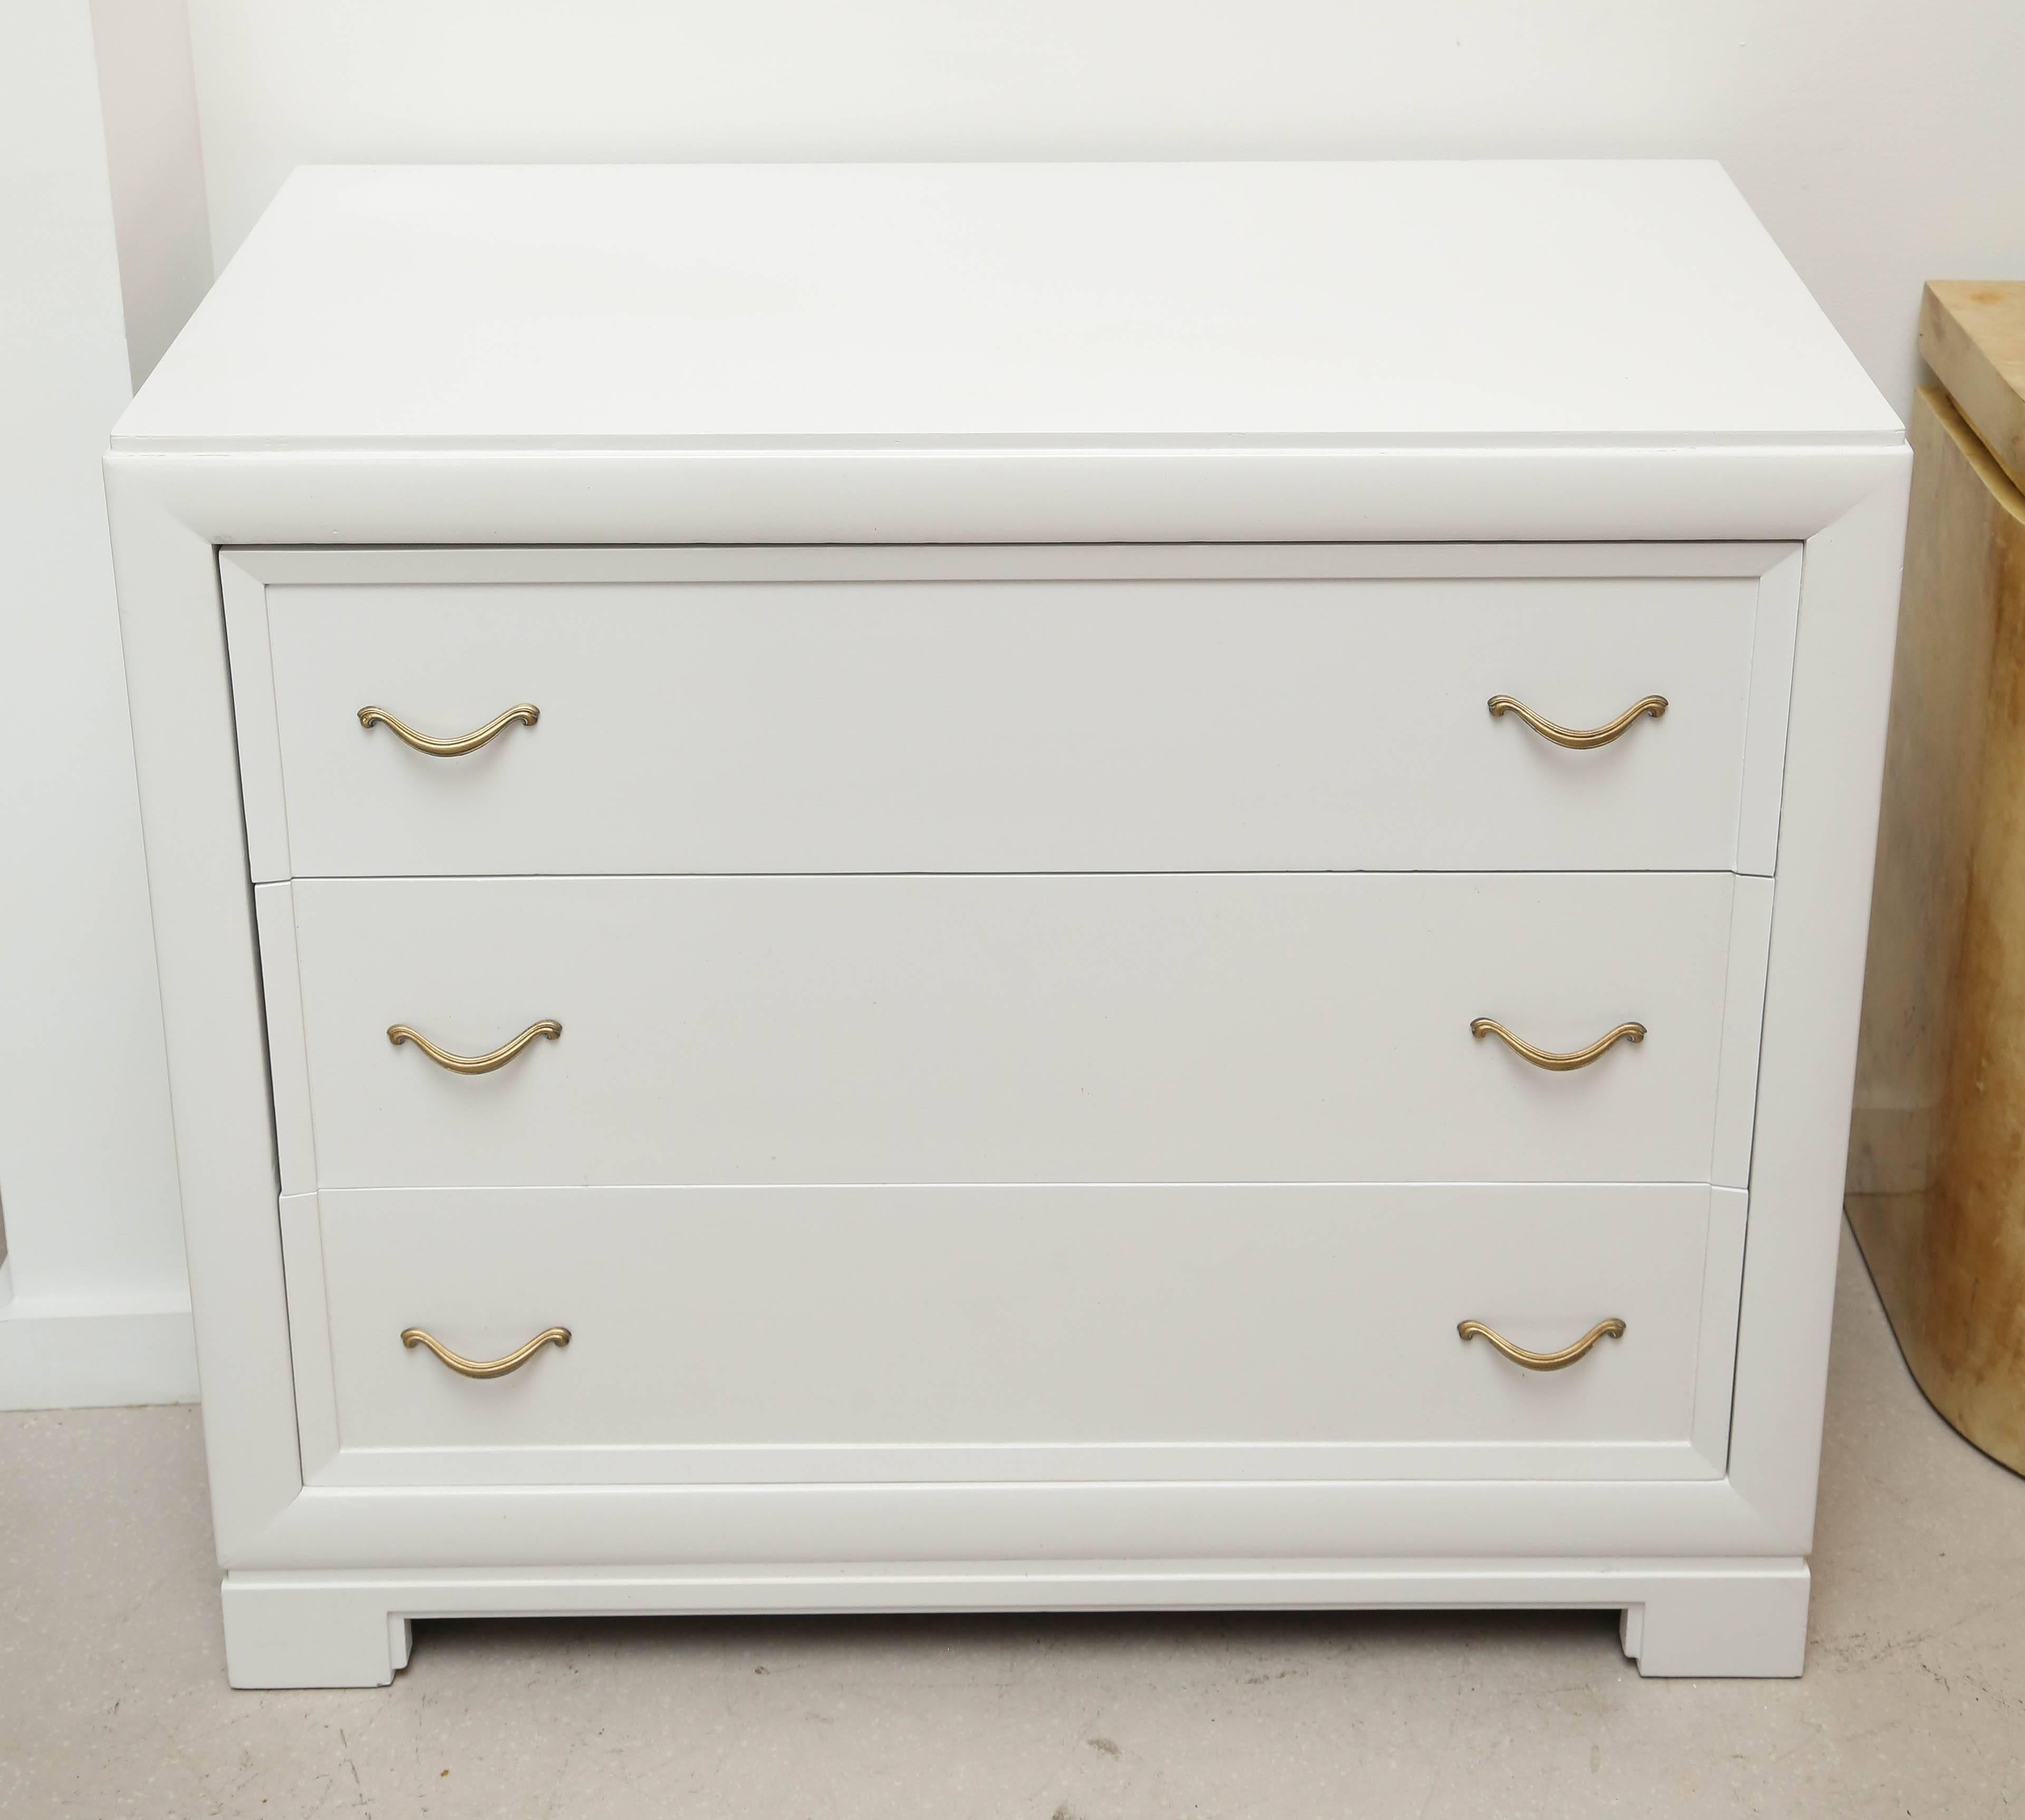 Pair of chests lacquered in white with three deep drawers each.